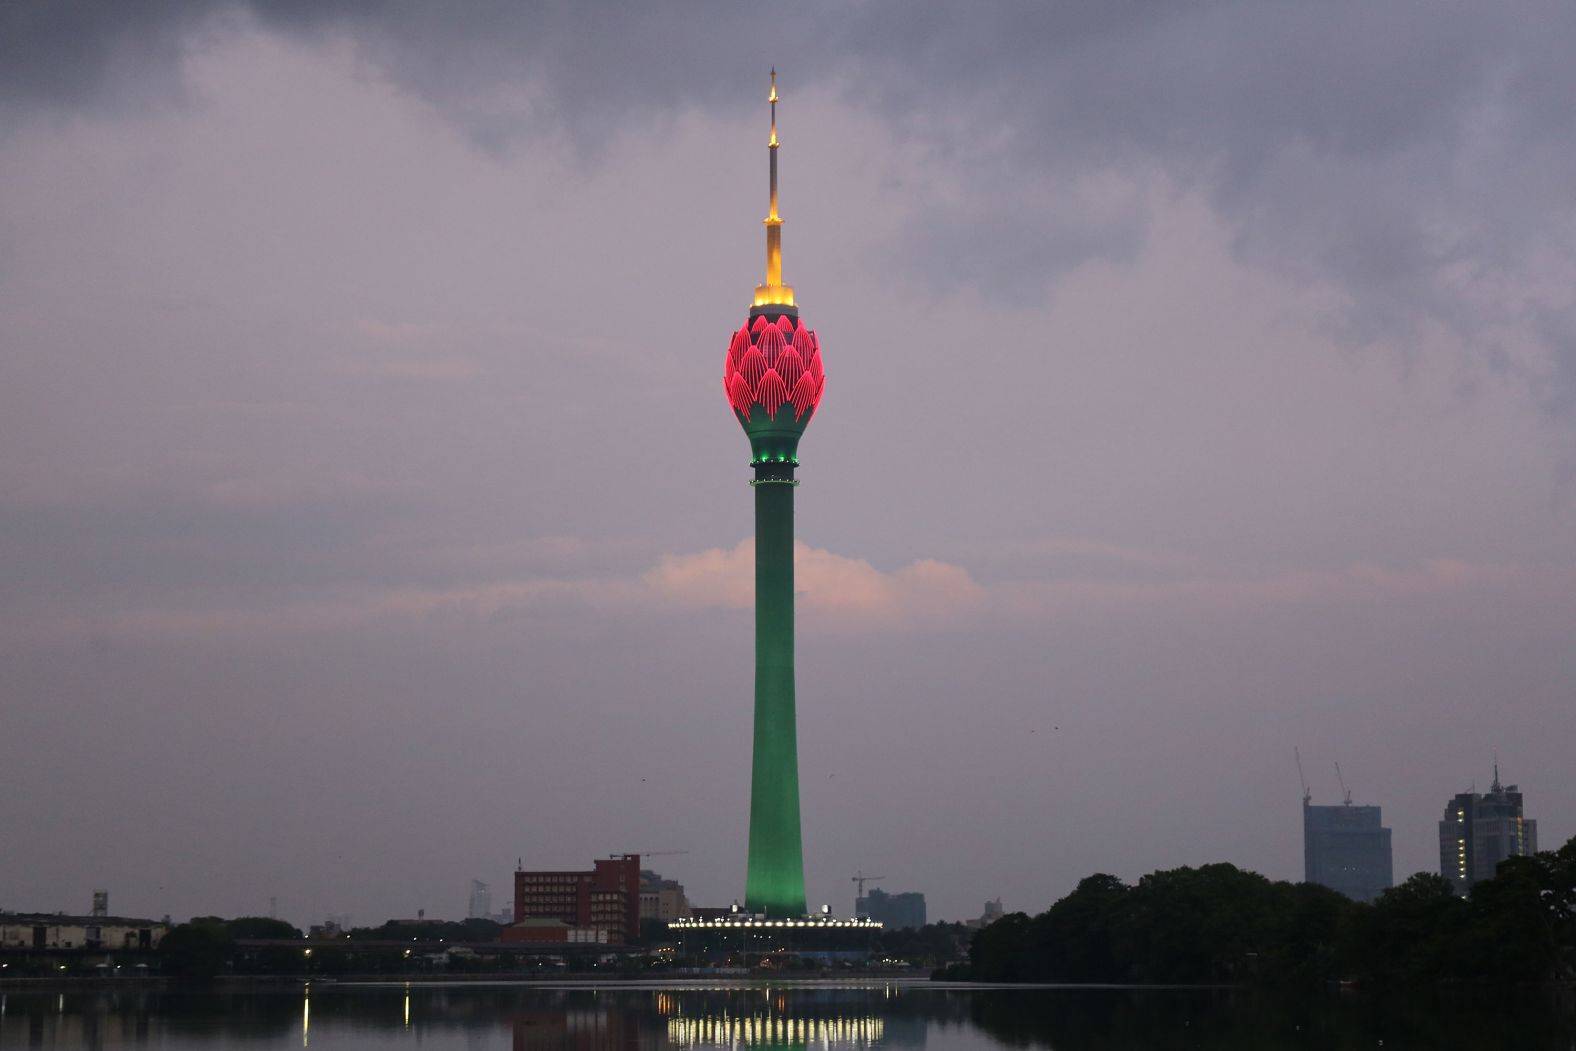 The Colombo Lotus Tower is lit in red as a tribute to workers in Colombo, Sri Lanka, on April 11.